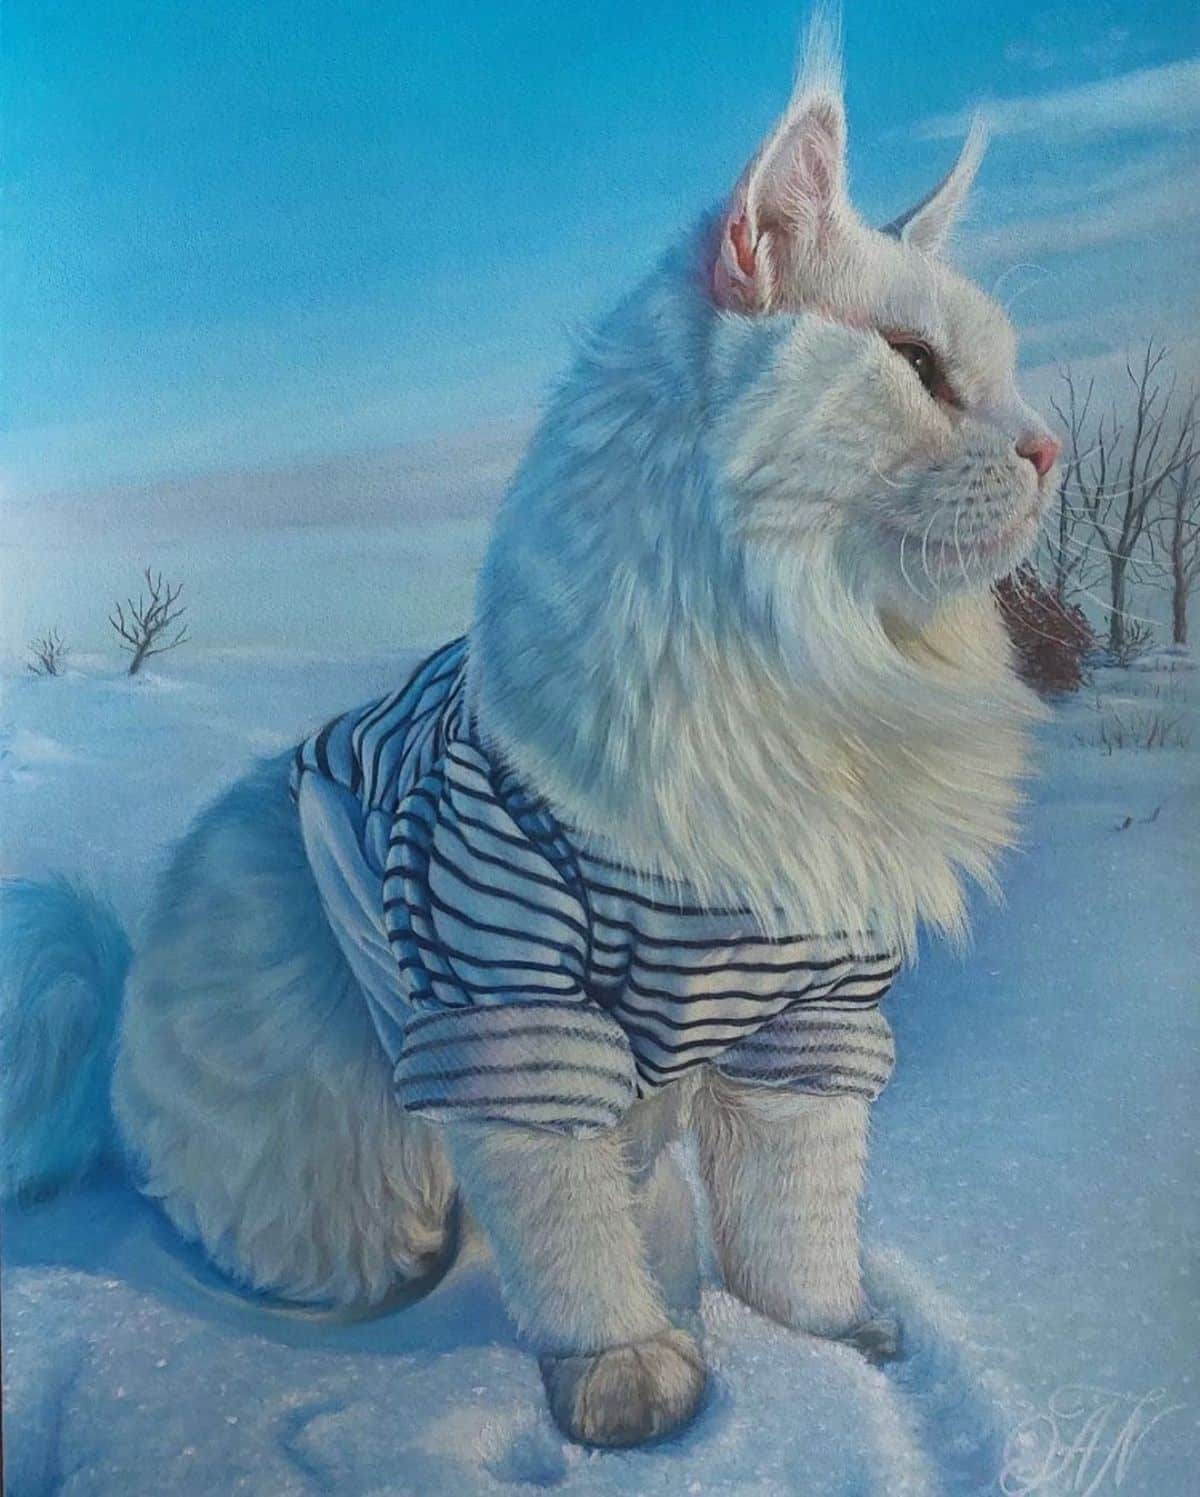 A white maine coon with a shirt sitting in snow.